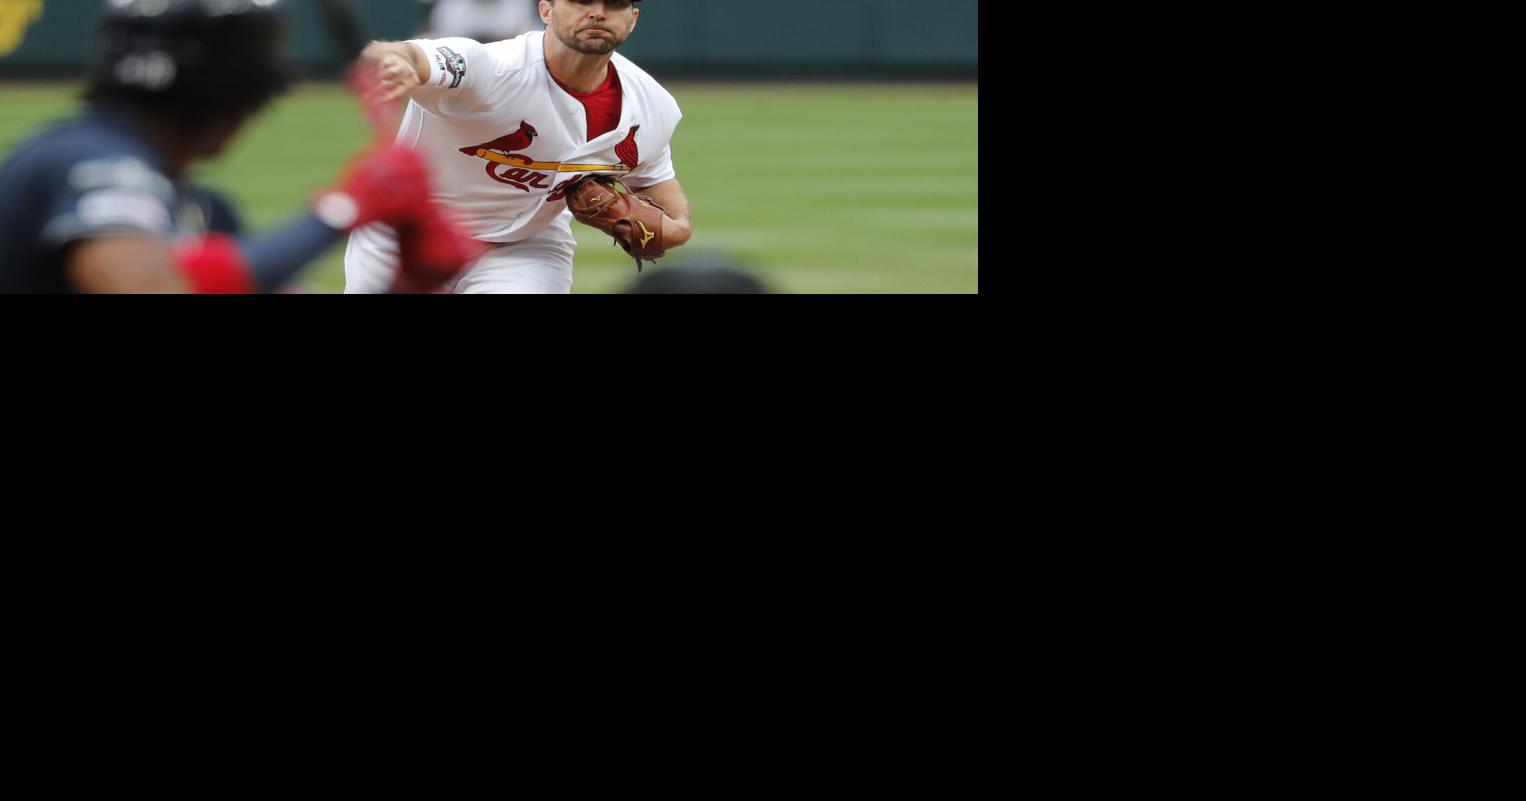 MLB 18 Batting Stance/Delivery Edits - Page 31 - Operation Sports Forums